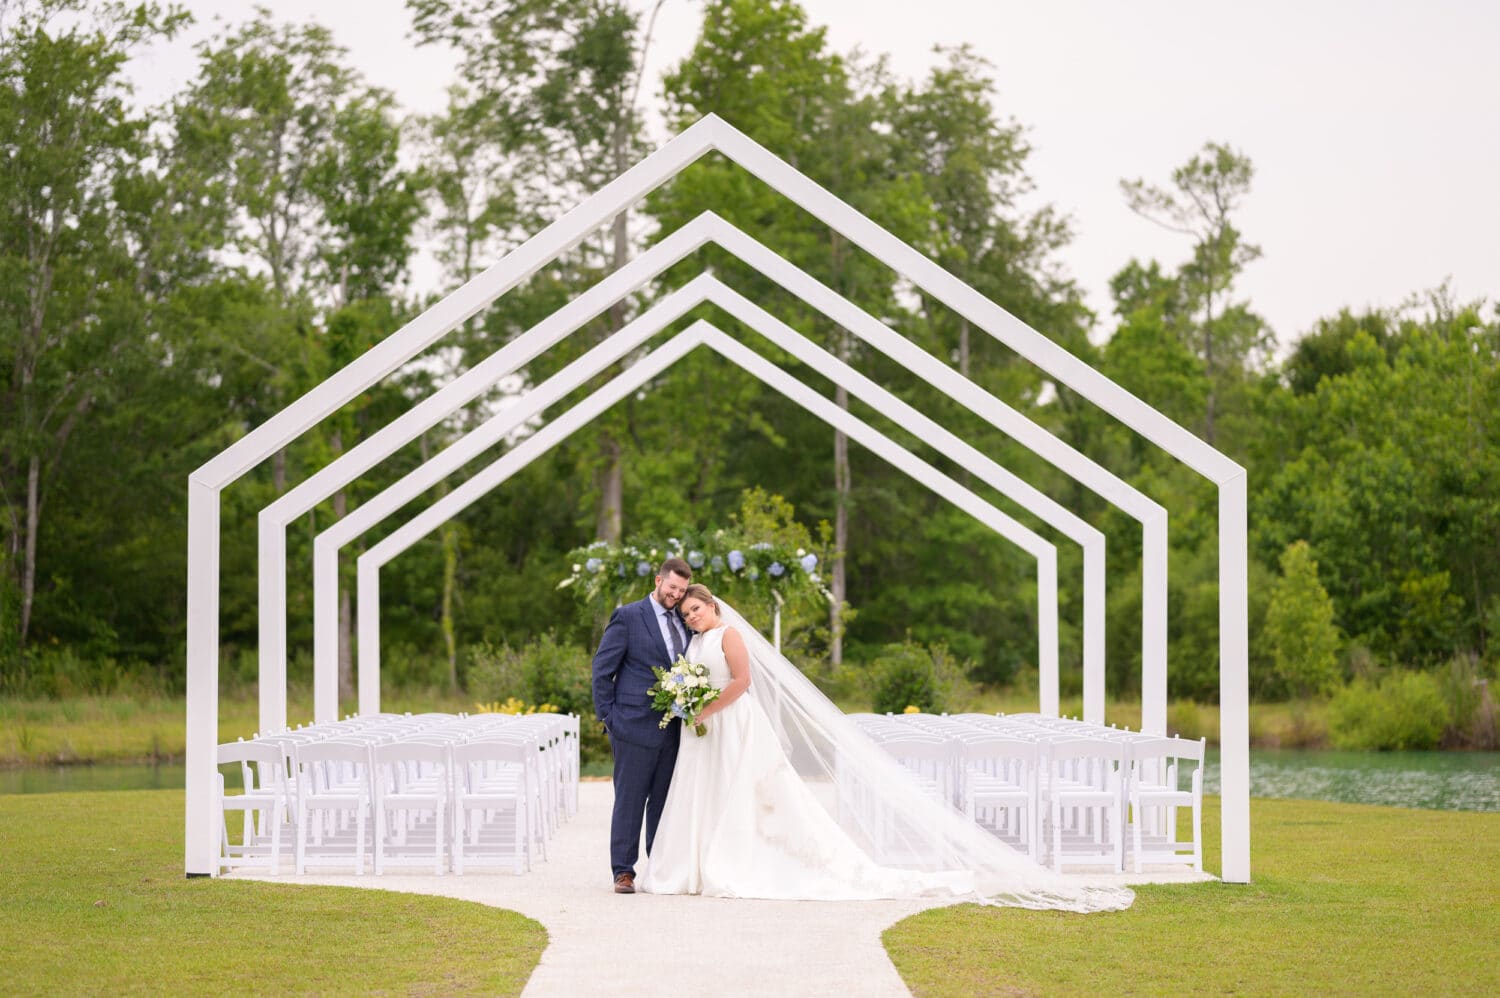 Portraits of the bride and groom under the ceremony arches - The Venue at White Oaks Farm